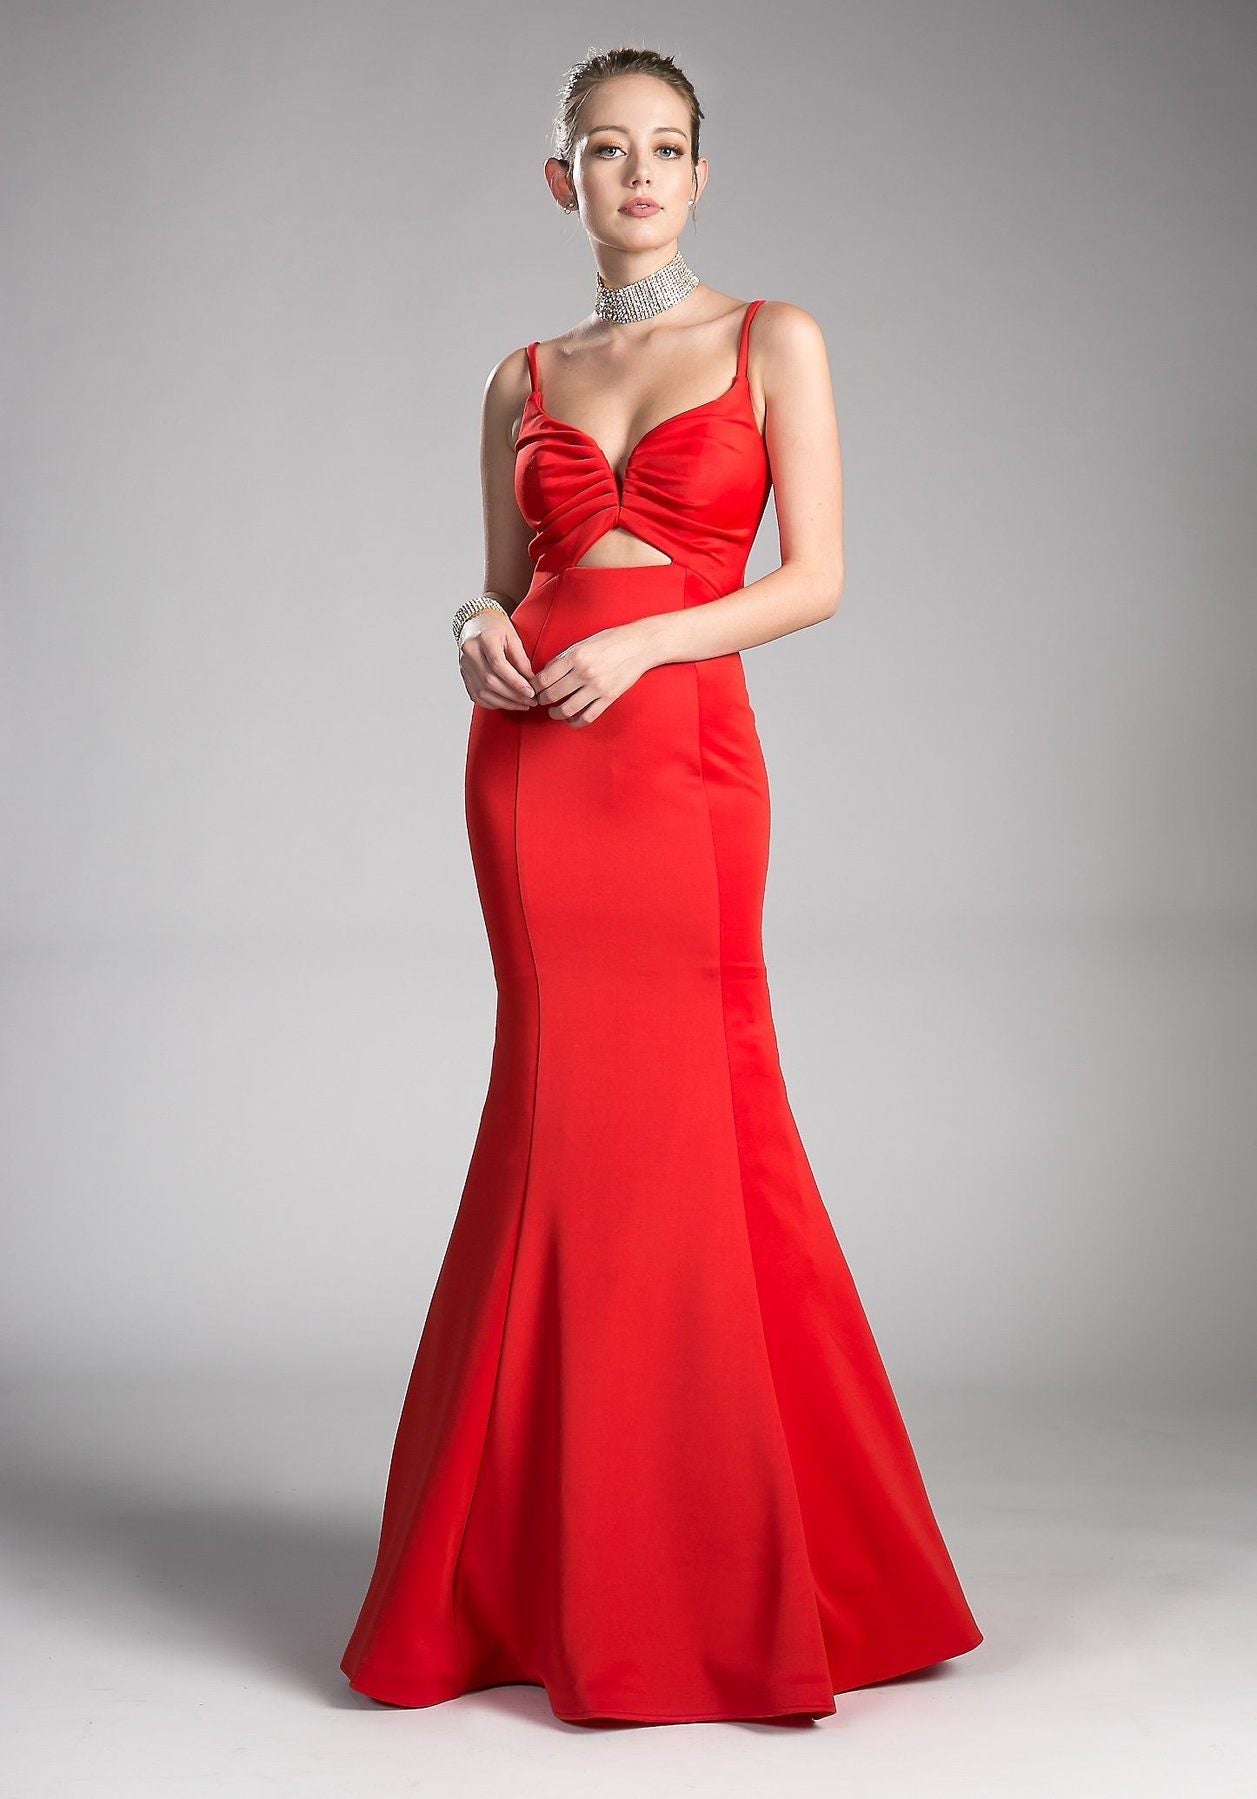 Red mermaid gown with red beadwork | Tulle evening dress, Luxury wedding  dress, Evening dresses